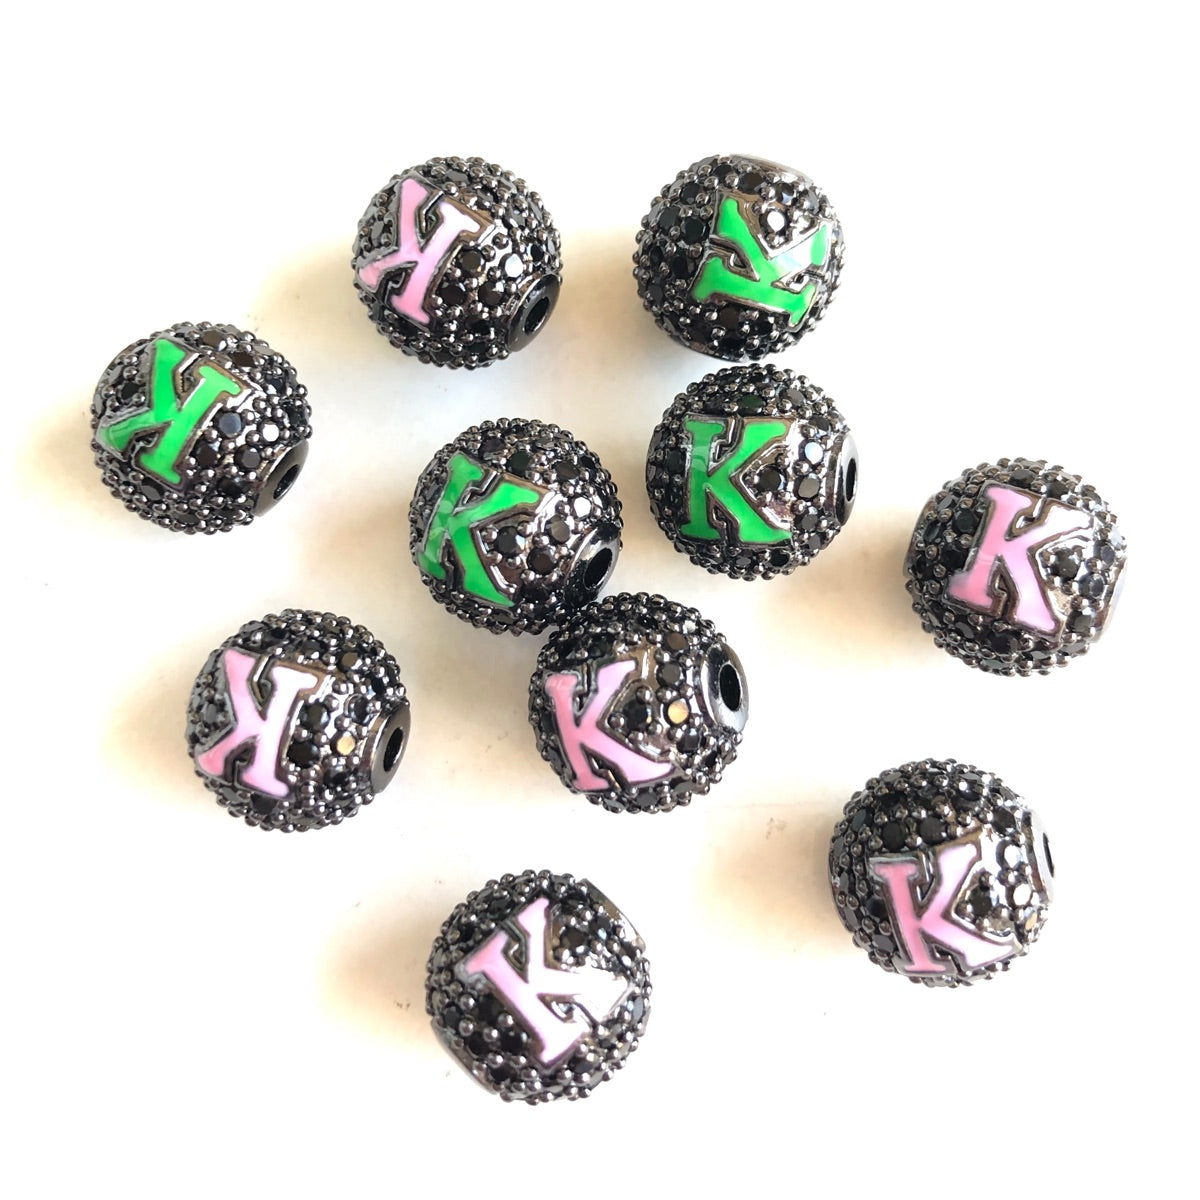 10mm Pink Green Enamel CZ Paved A, K Initial Alphabet Letter Ball Spacers Beads | Spacers | Charms Beads Beyond Black on Black K